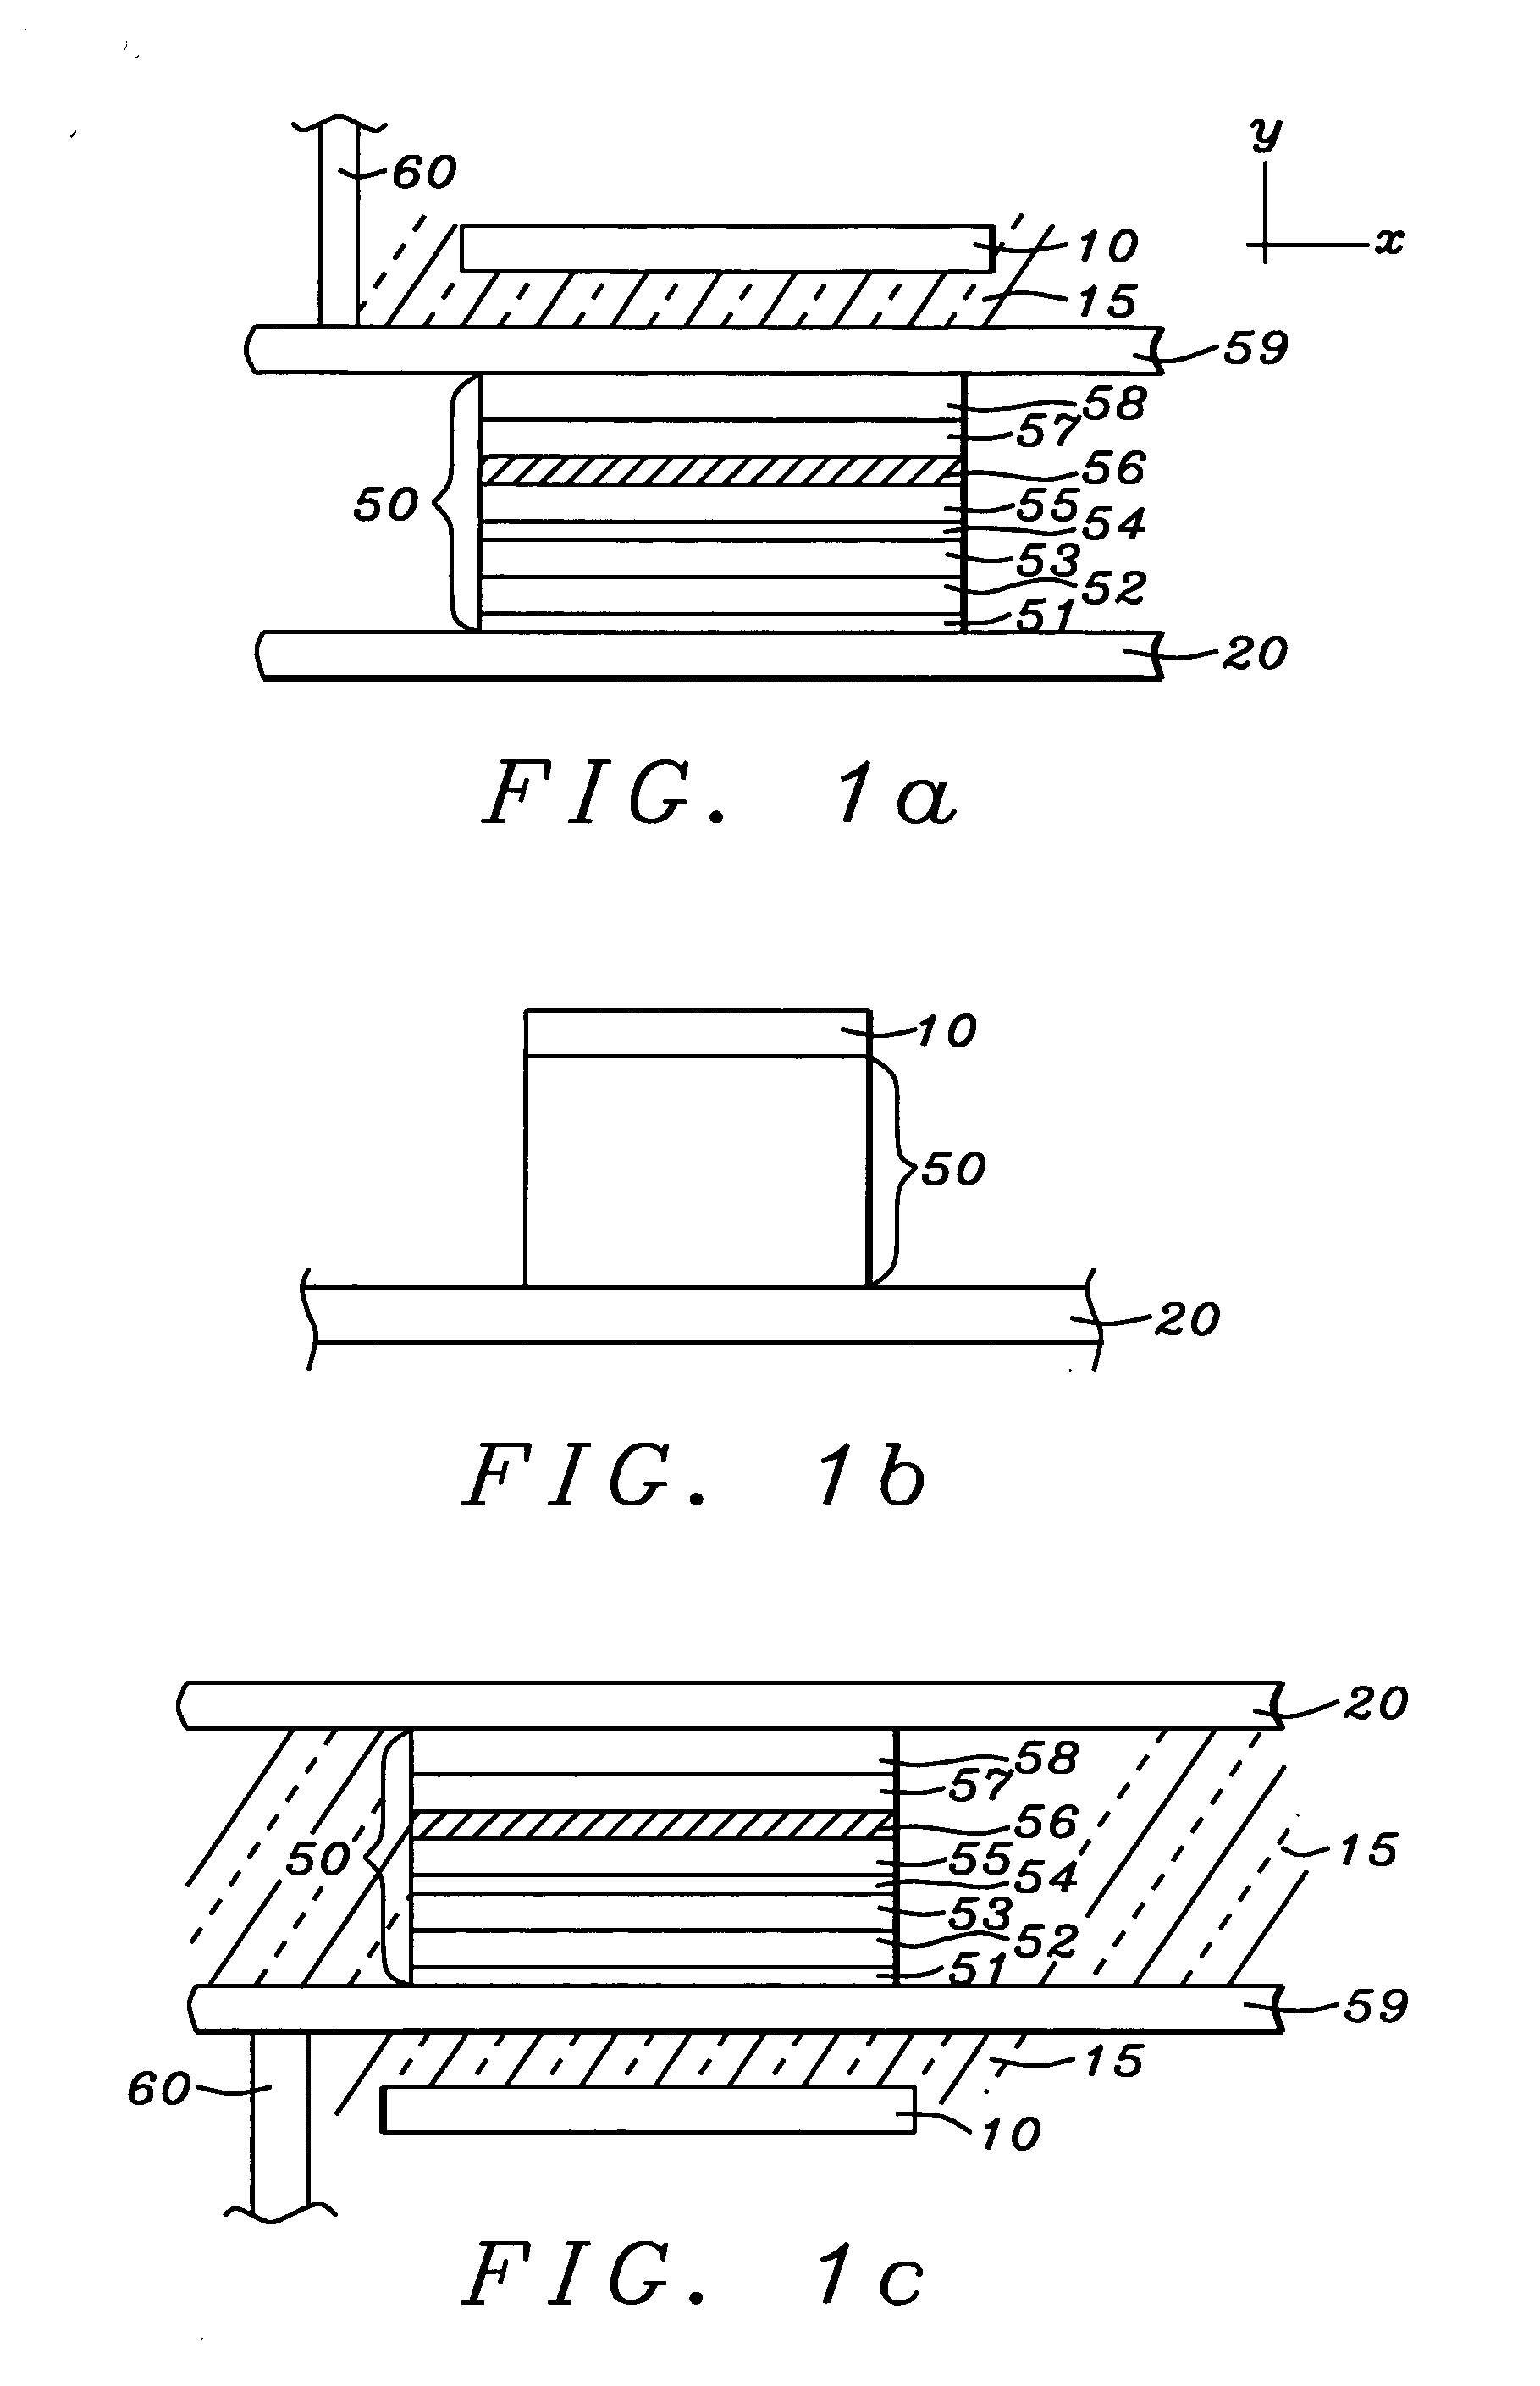 Magnetic random access memory array with thin conduction electrical read and write lines